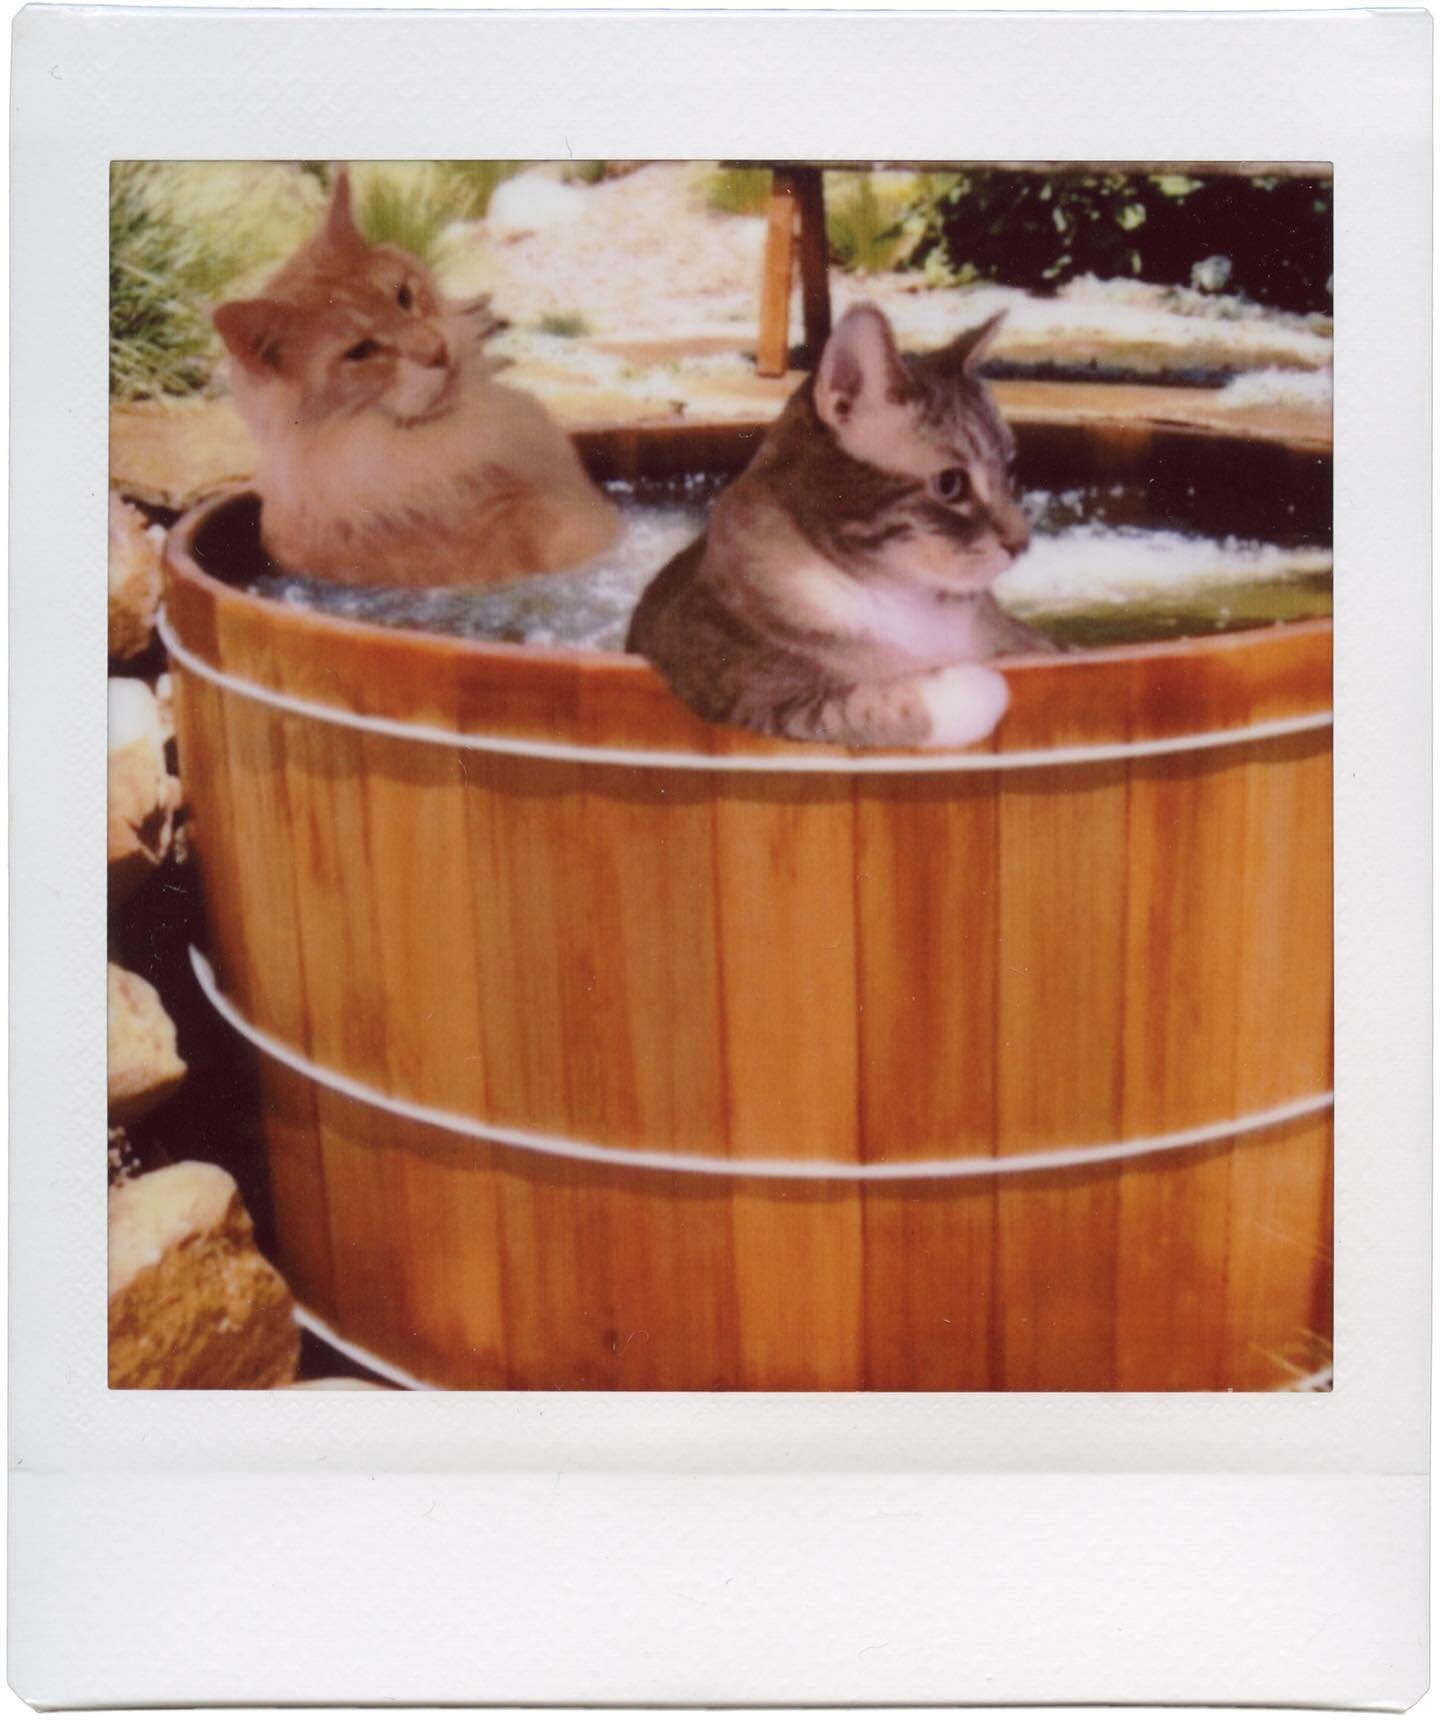 #boysinthetub #theboys 

I finally got around to scanning some of my instant film. This elegant piece, titled &ldquo;Boys in the Tub,&rdquo; is a print on Instax film. Notice how the lines draw the viewers eye in and beg the question, &ldquo;why the 